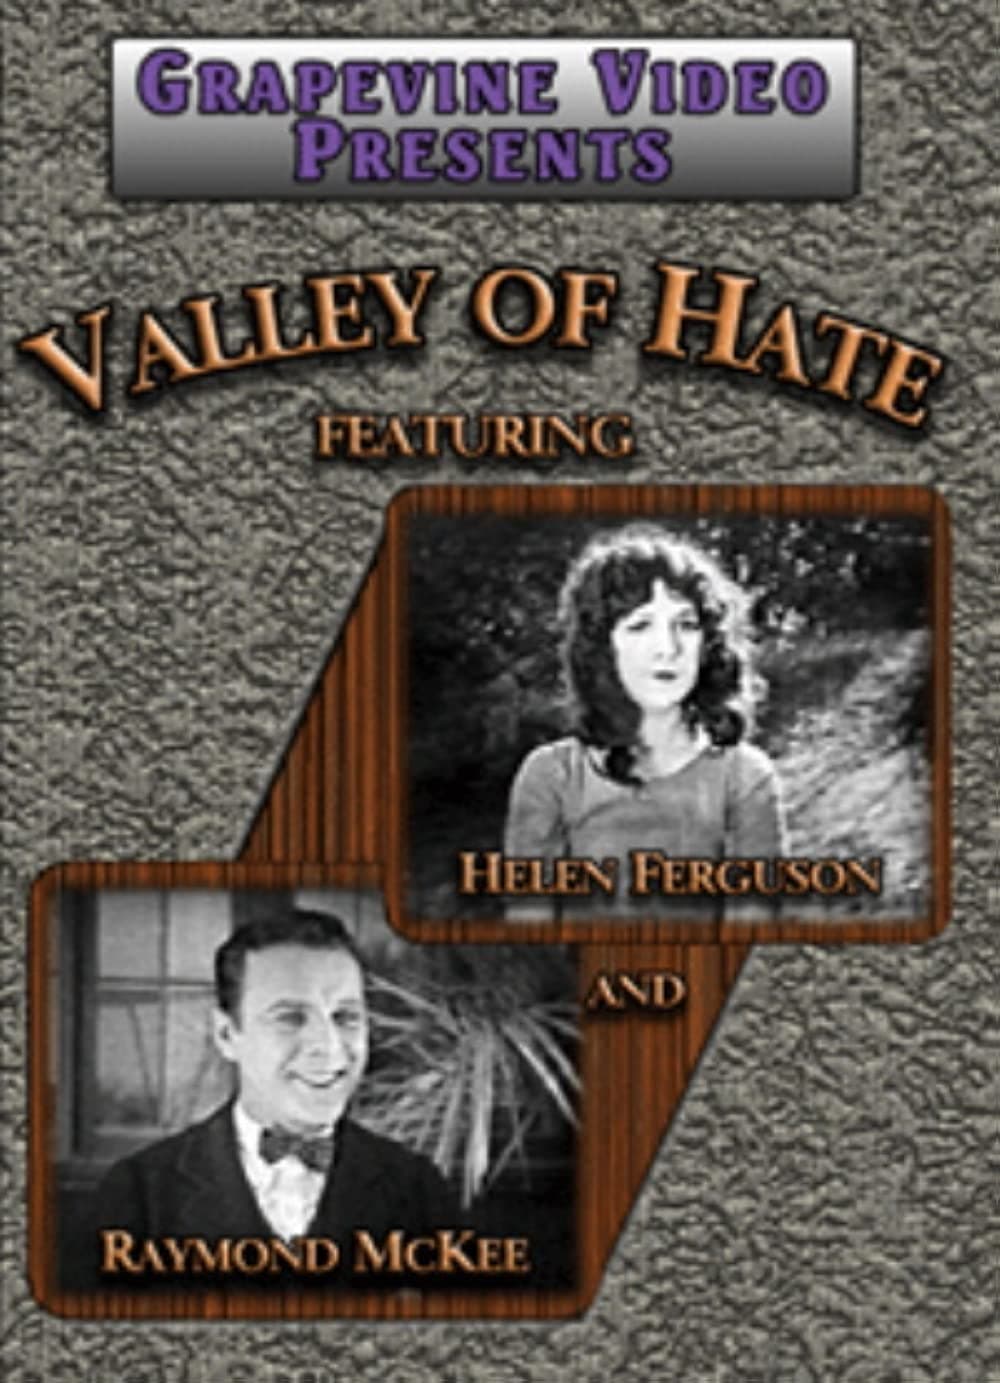 The Valley of Hate